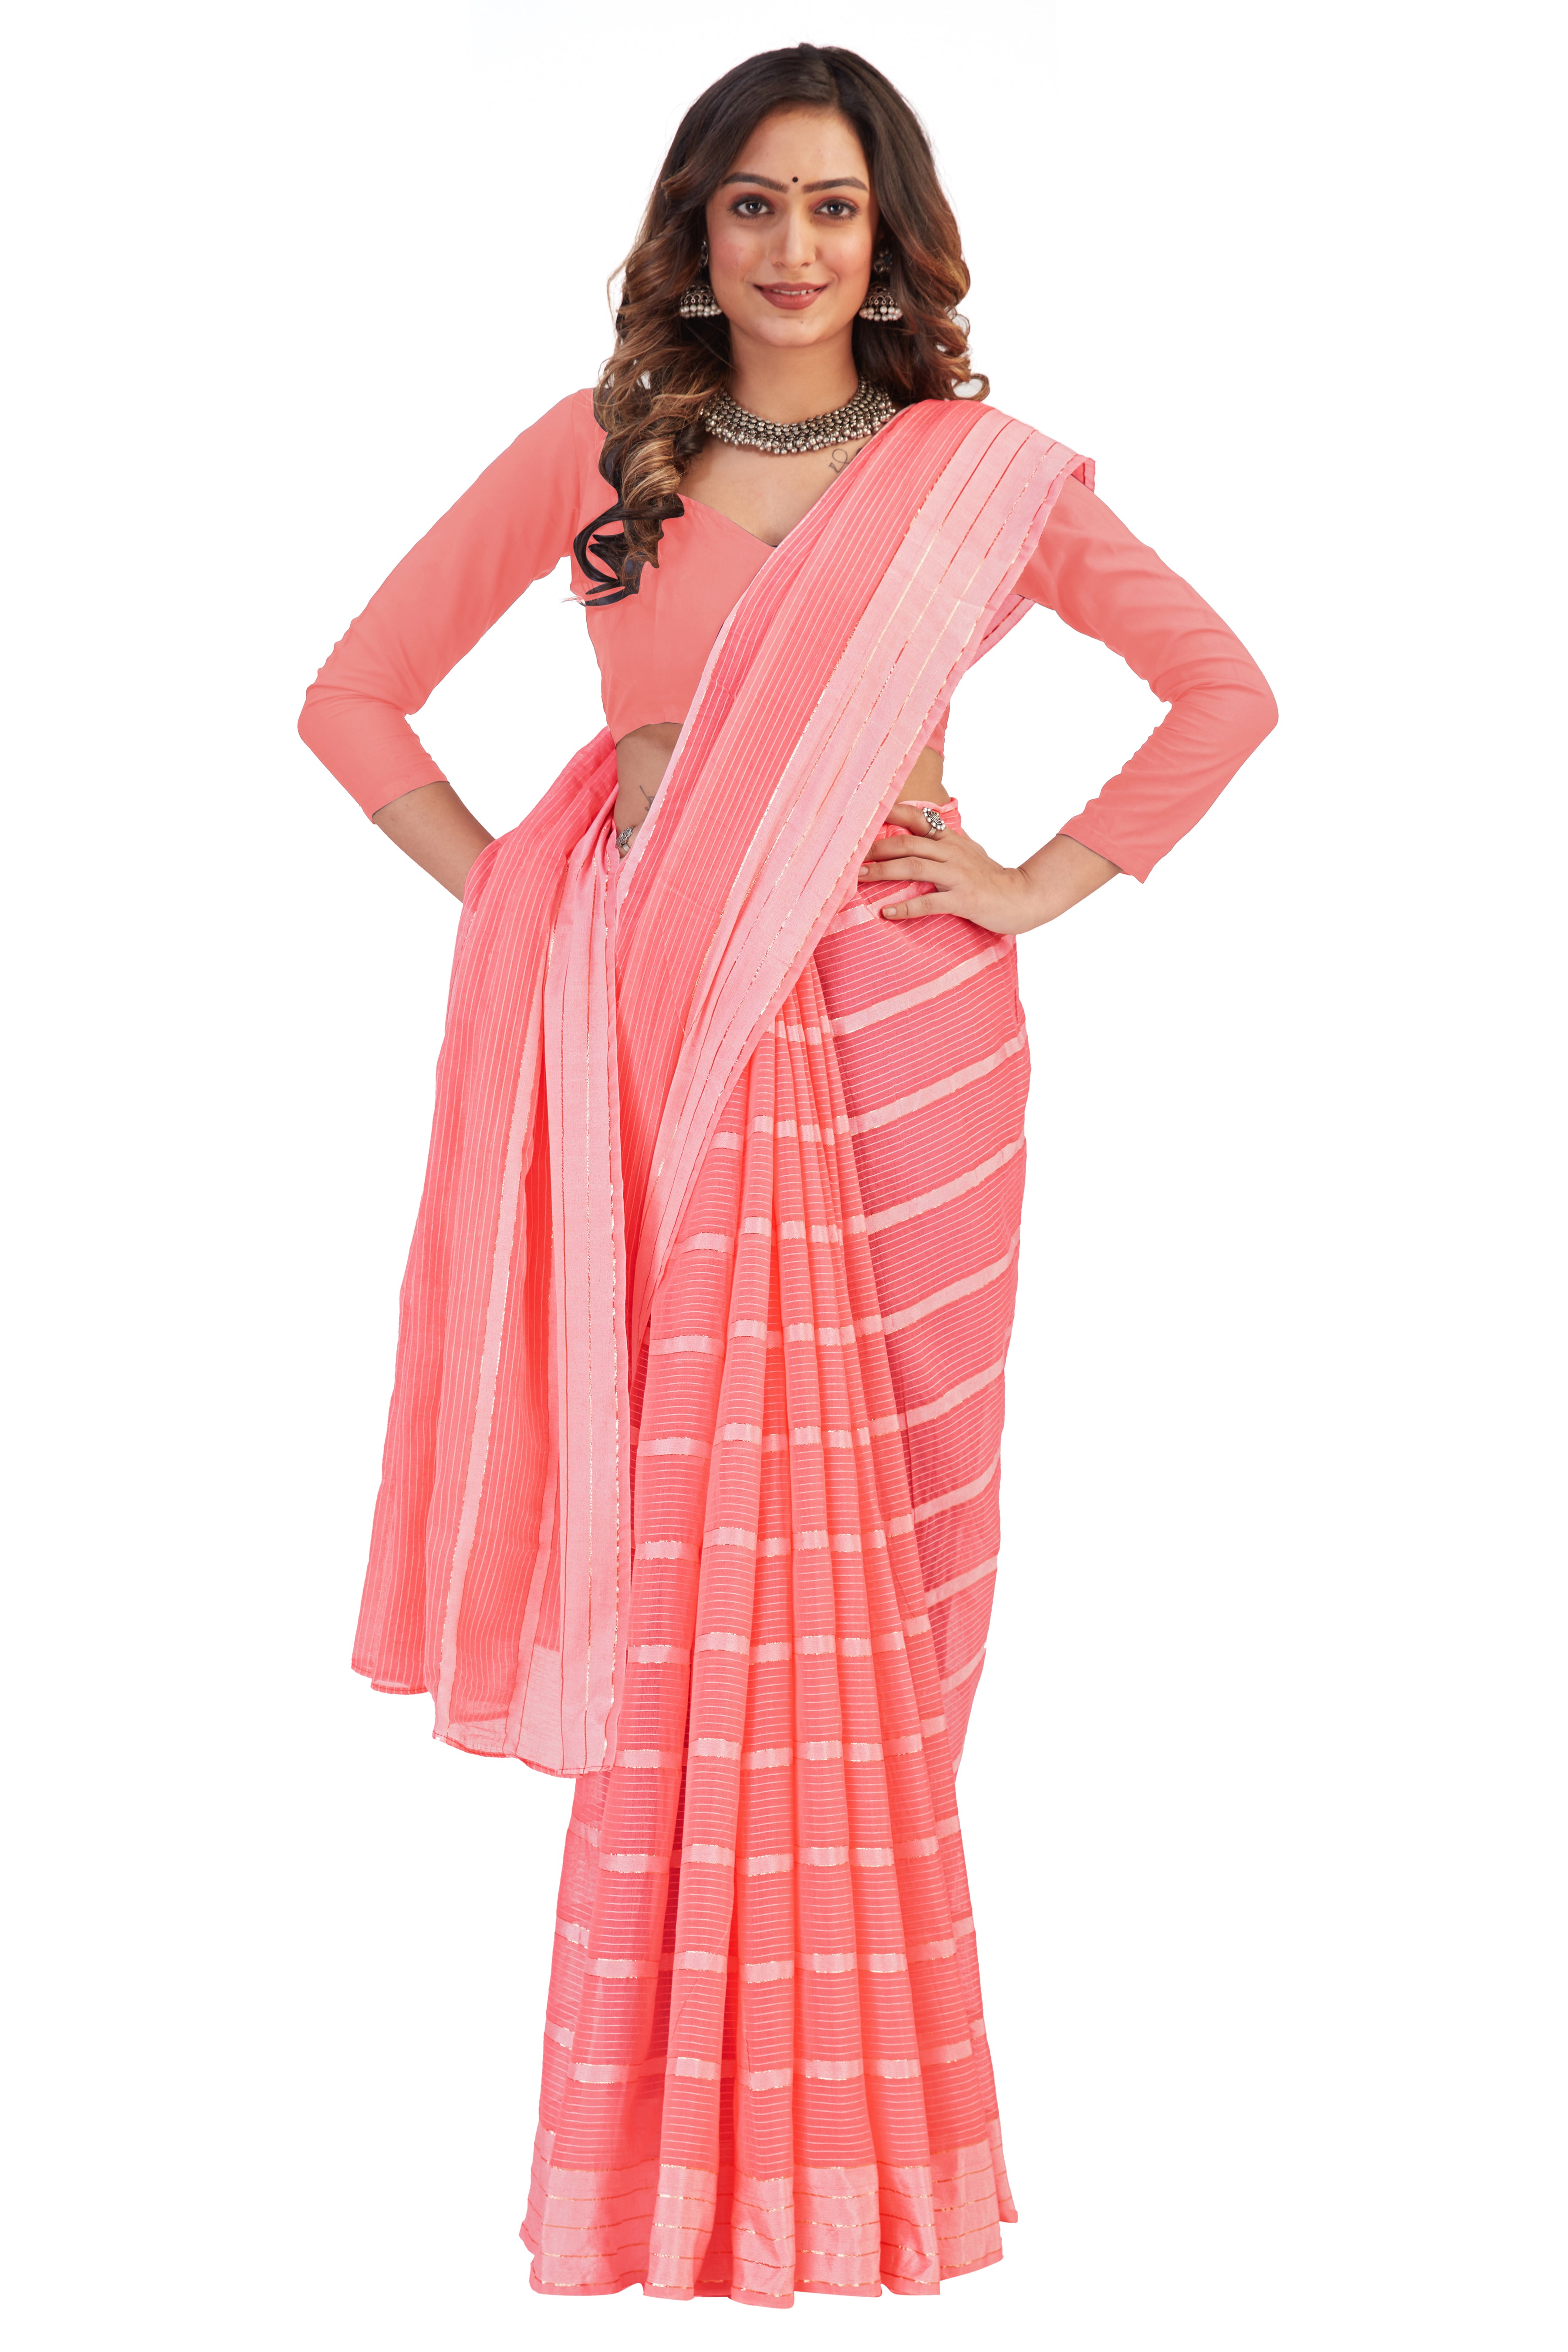 Women's self Woven striped Daily Wear Cotton Blend Sari With Blouse Piece (Baby Pink) - NIMIDHYA